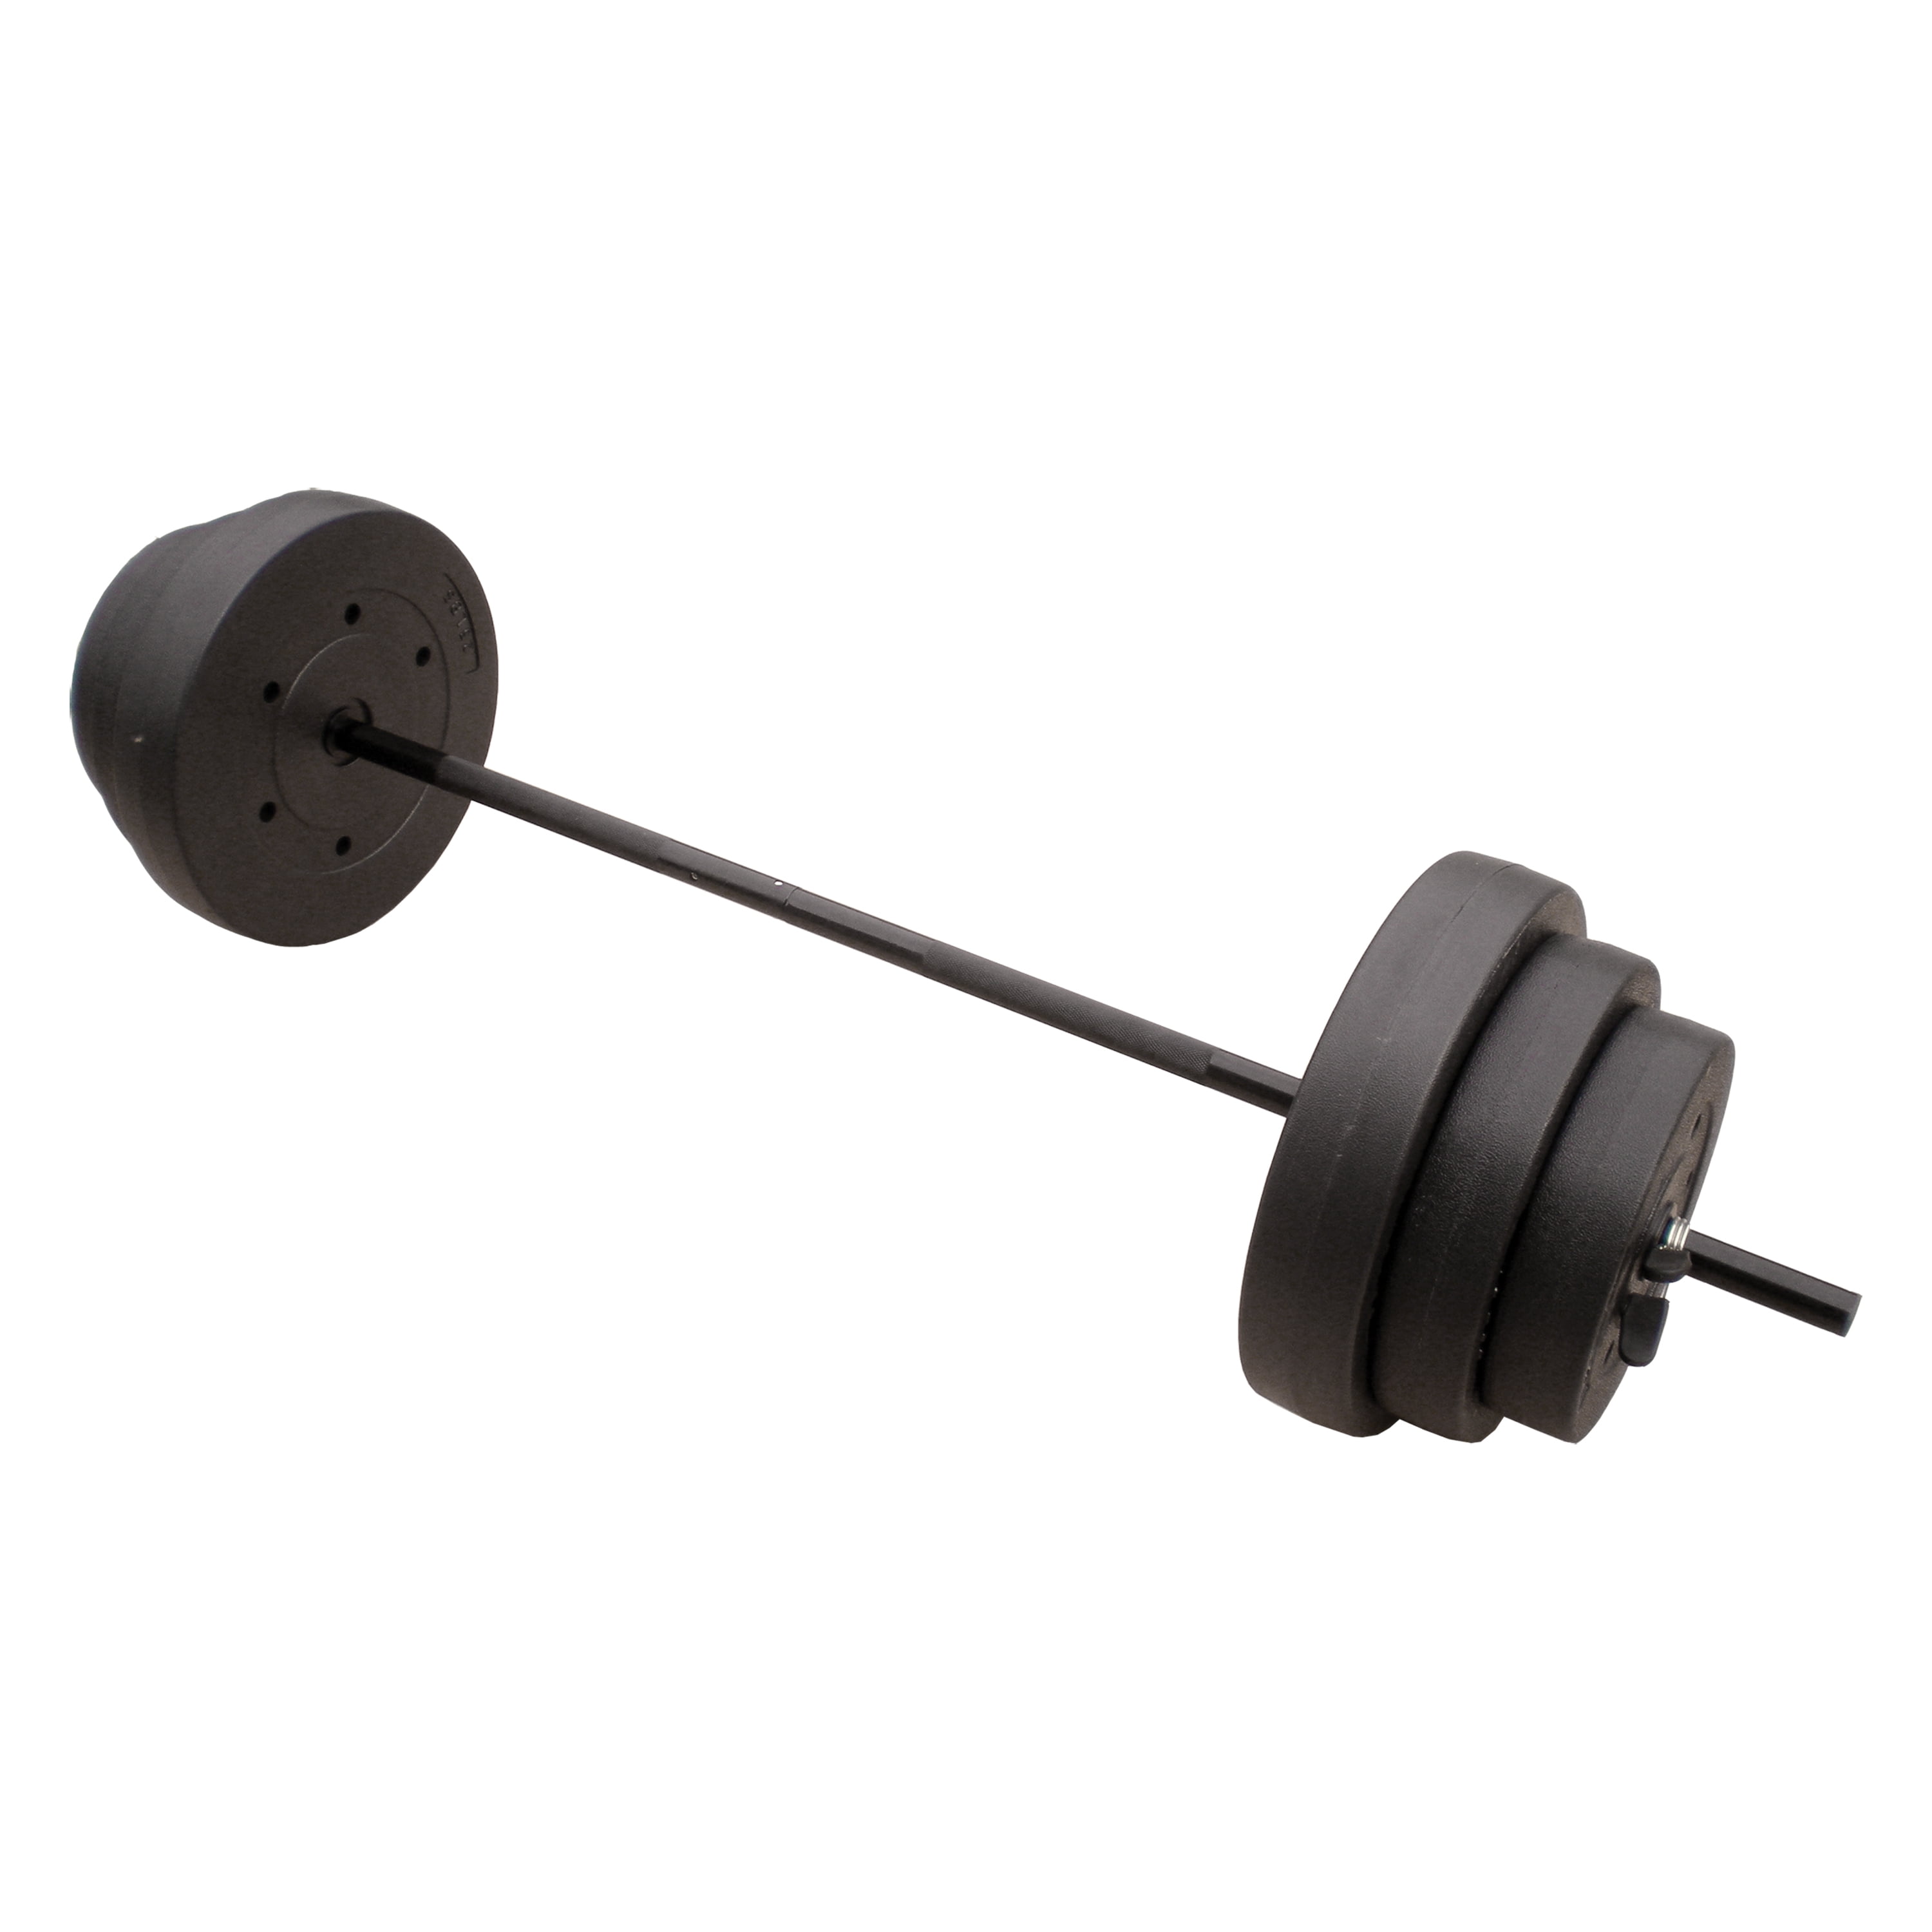 BRAND NEW CAP BARBELL 40-POUND ADJUSTABLE VINYL DUMBBELL WEIGHT SET IN HAND 40LB 